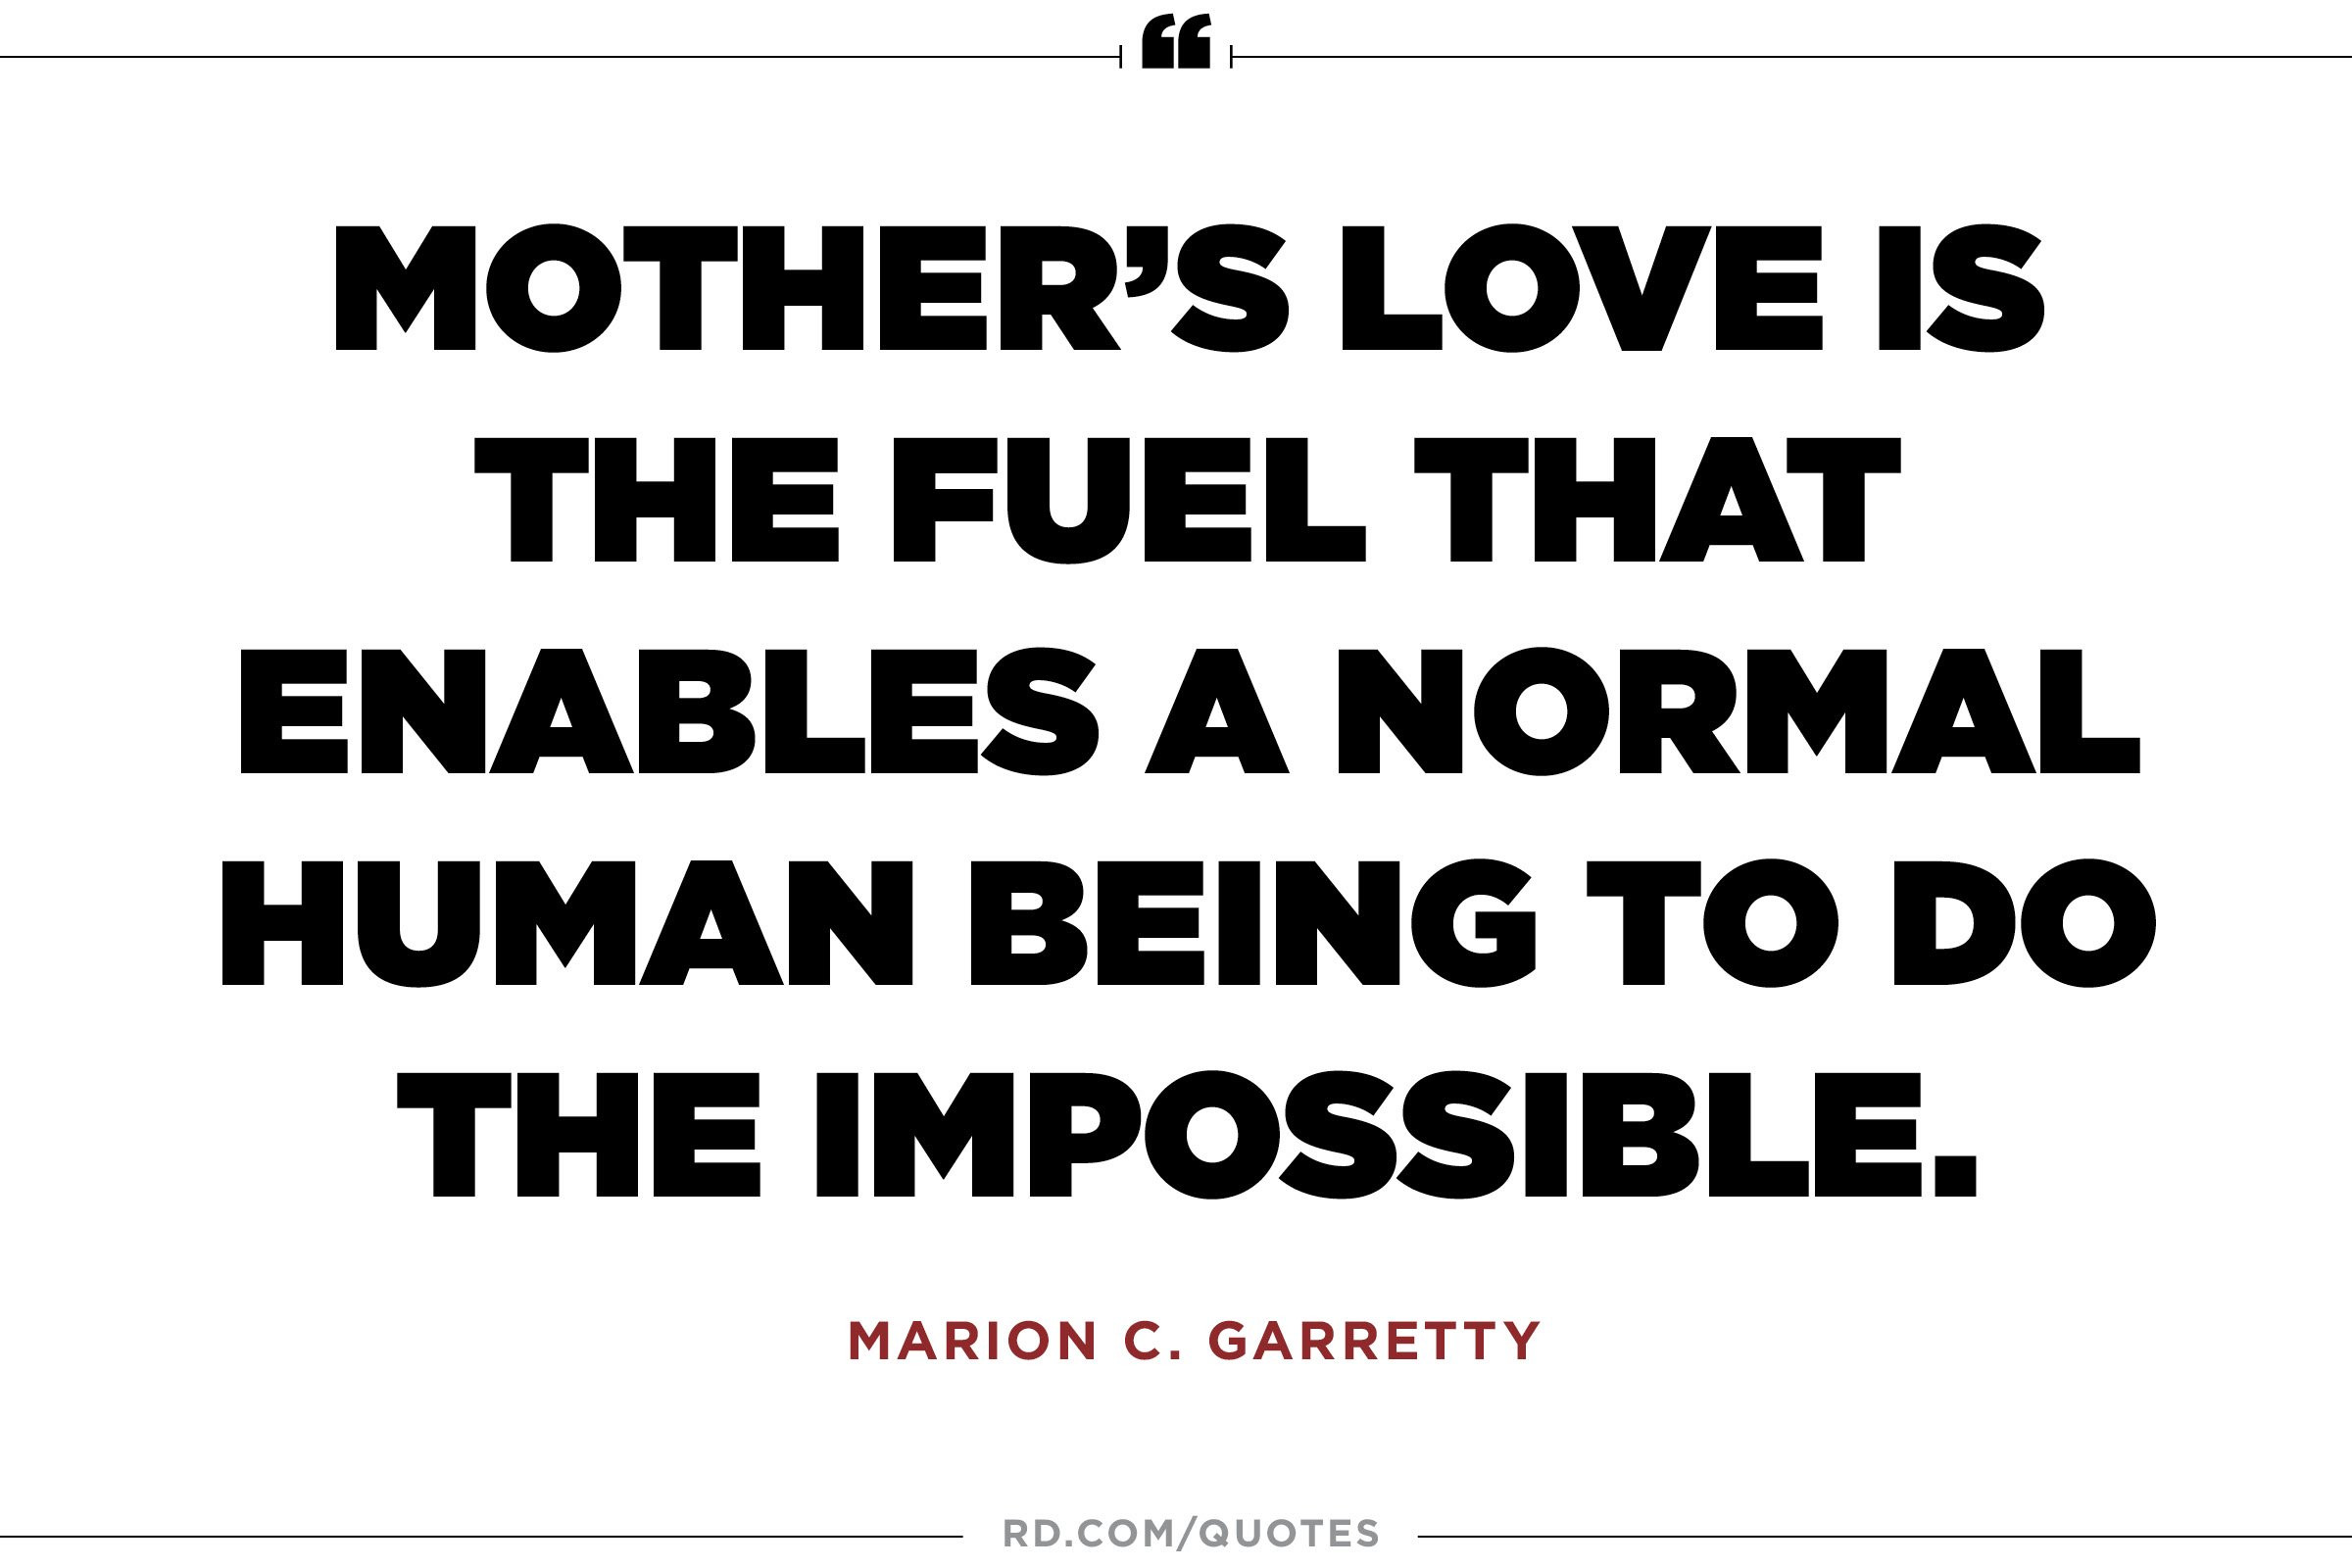 Quotes For Mothers
 11 Quotes About Mothers That ll Make You Call Yours